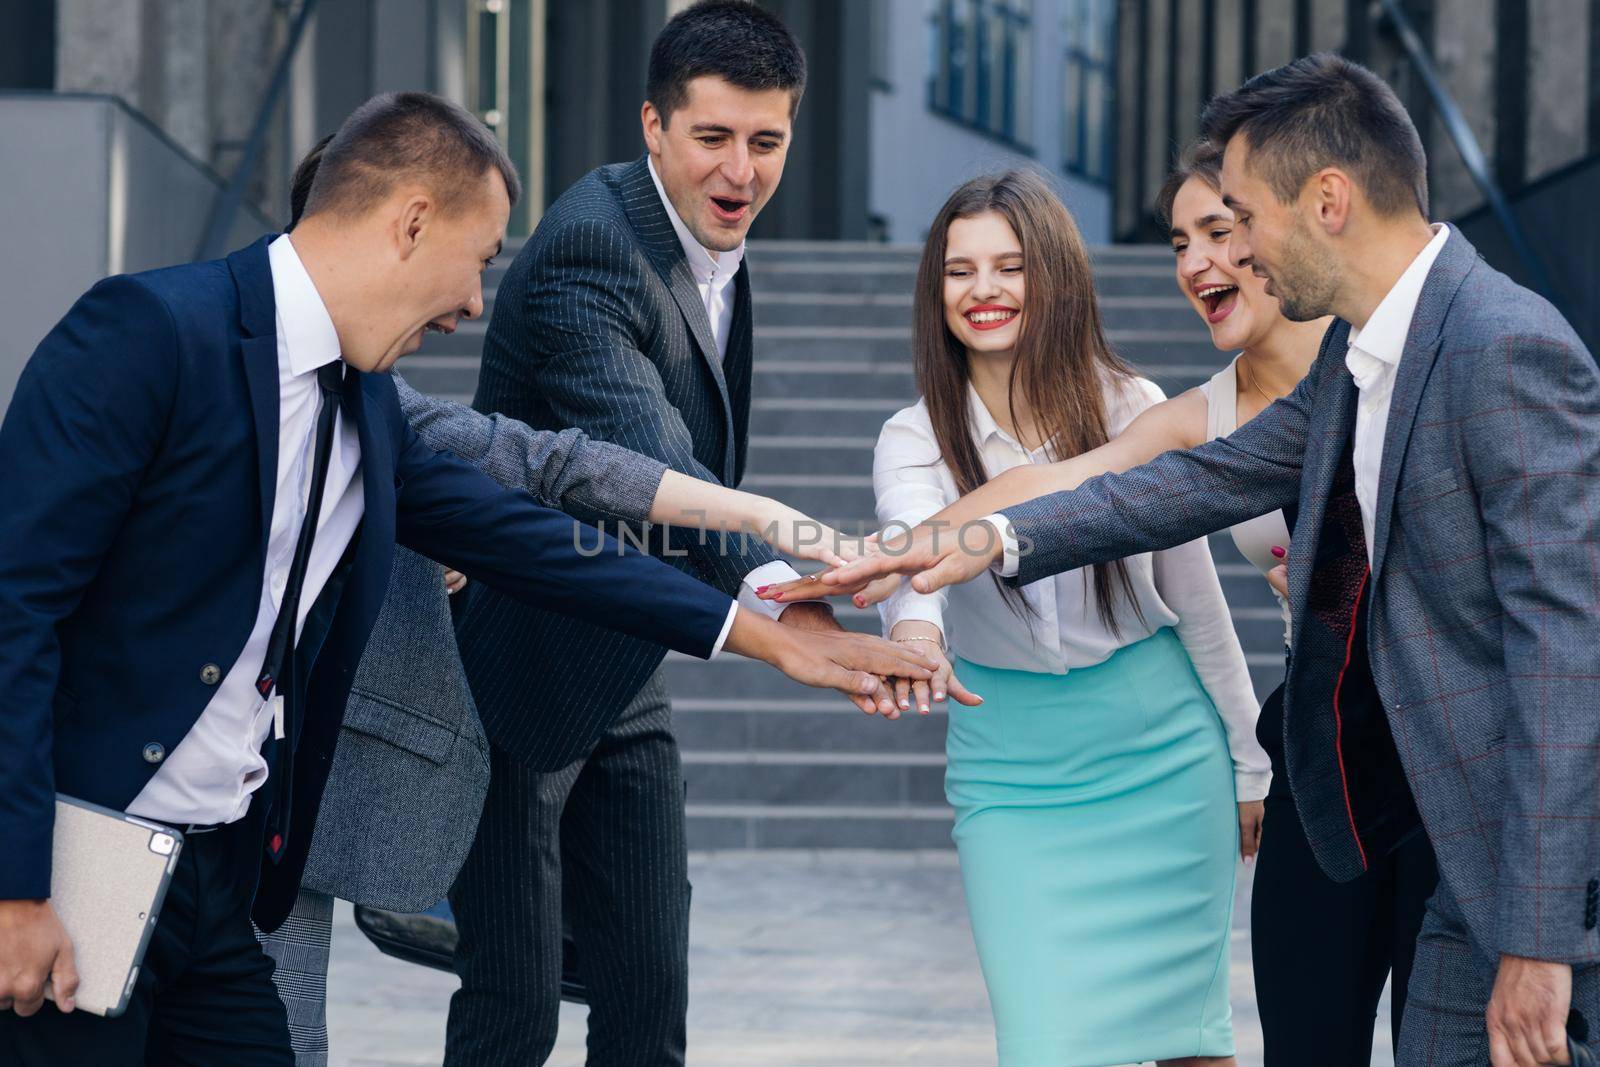 Happy Leader Motivate Diverse Employees Business Team Give Five Together, Office Workers Group and Coach Engaged in Team Building Celebrate Success Good Results Reward in Teamwork Concept. by uflypro